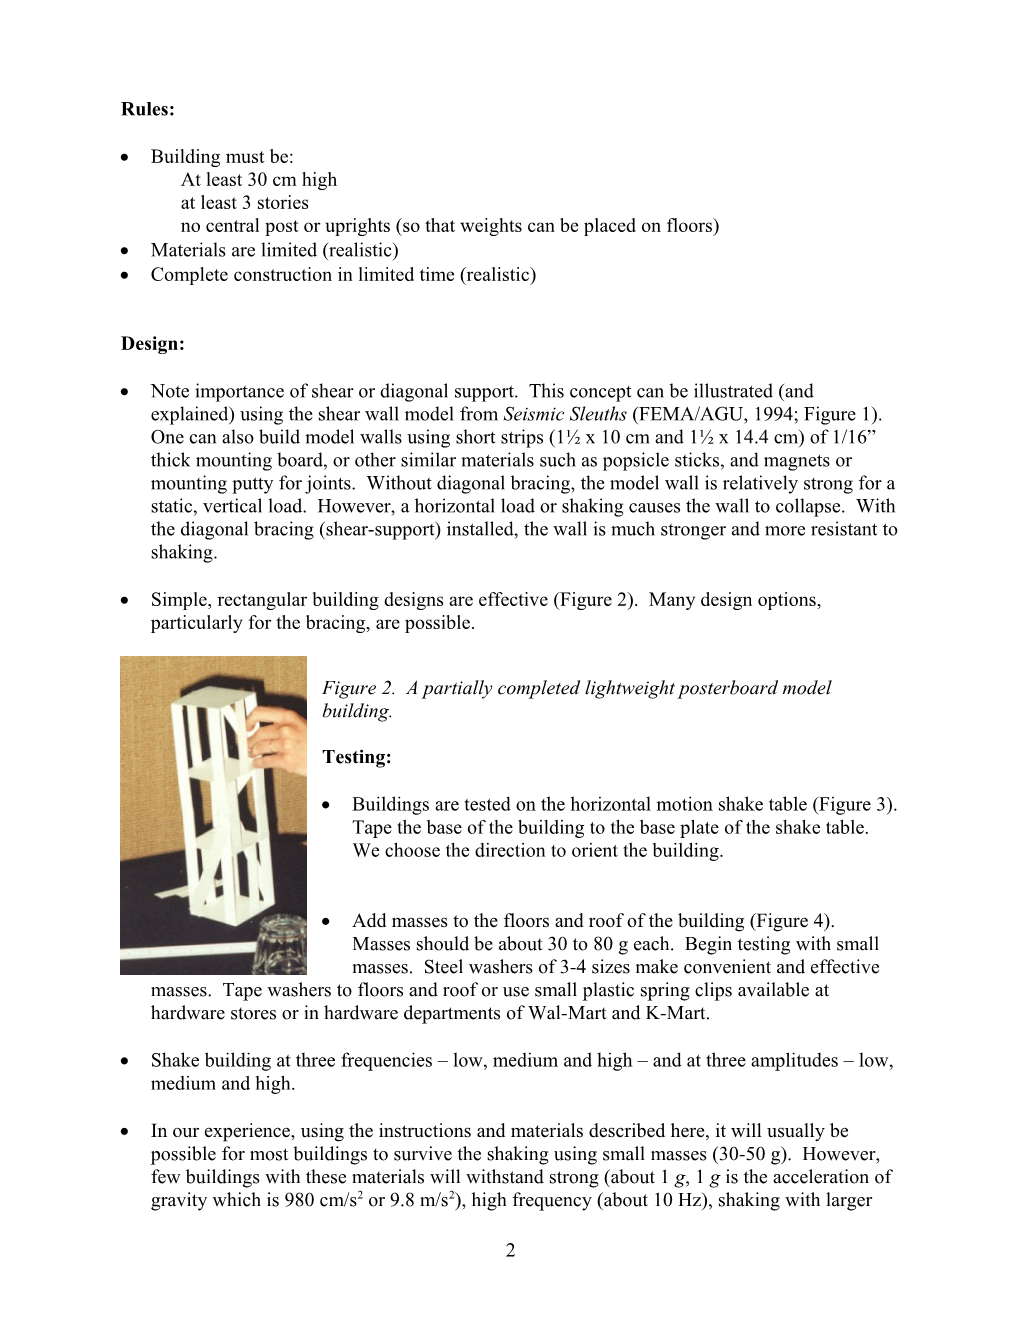 Instructions for Model Buildings for Building Contest and Shake Table Testing